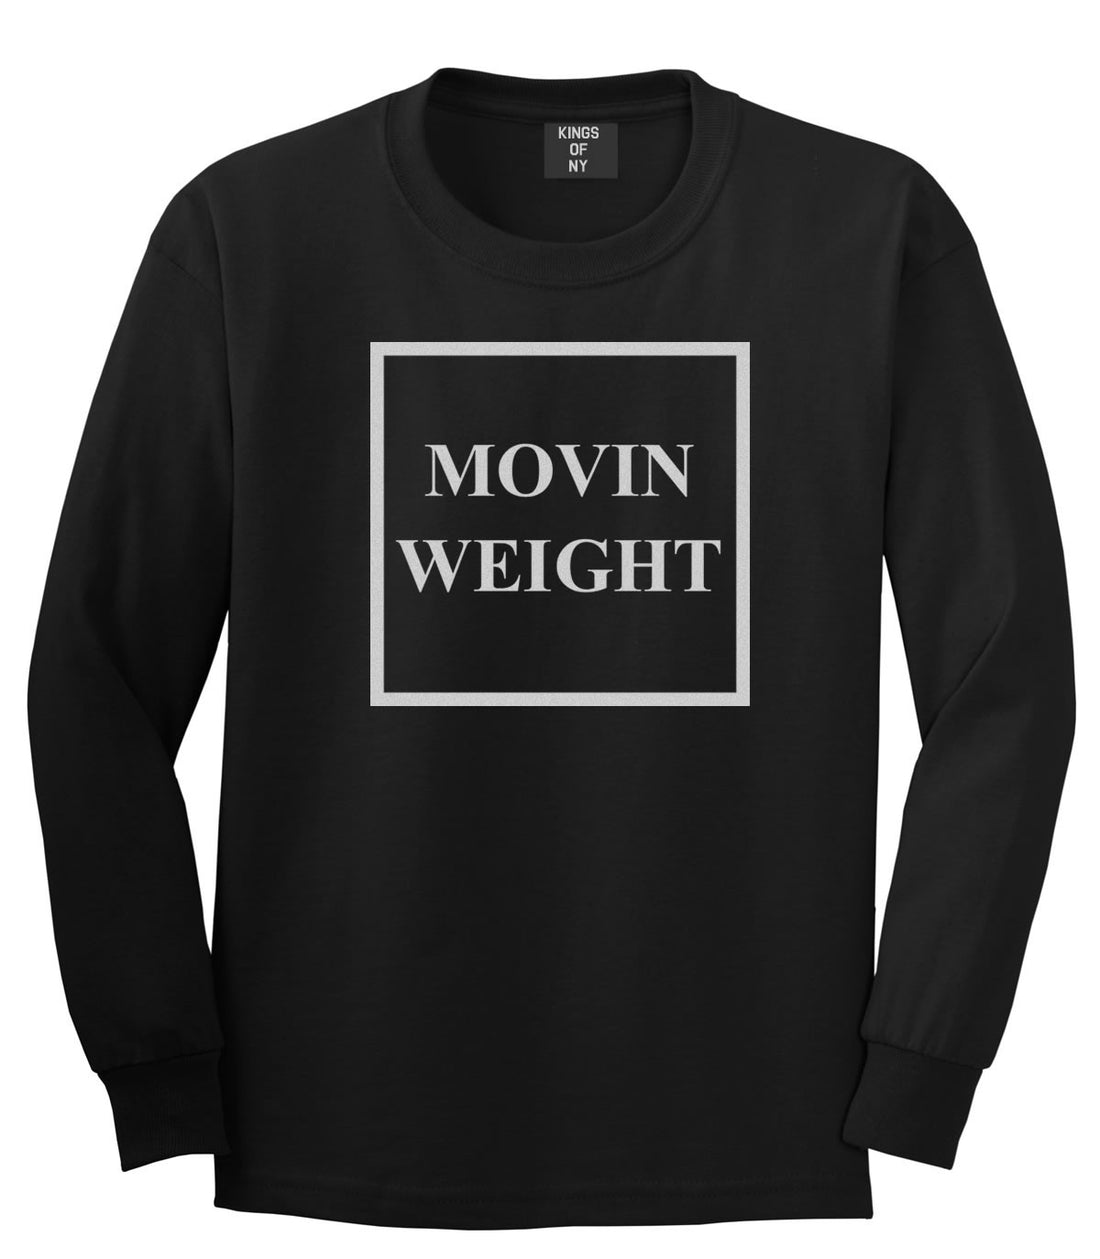 Movin Weight Hustler Long Sleeve T-Shirt in Black by Kings Of NY